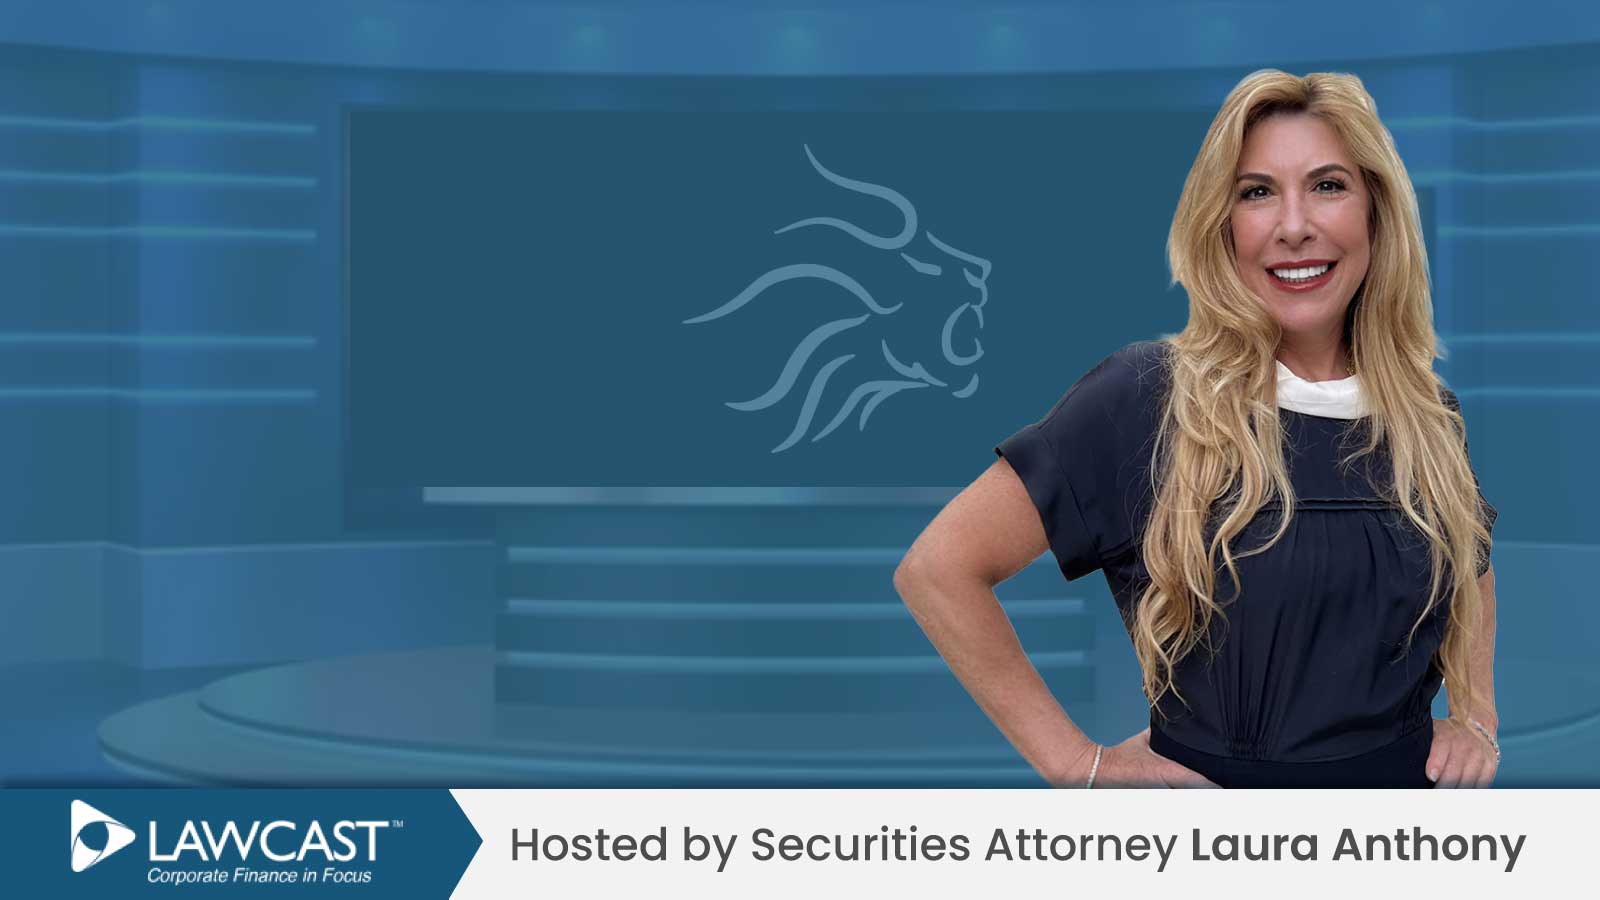 LawCast Securities Law TV Hosted by Laura Anthony Founding Partner of Anthony L.G., PLLC